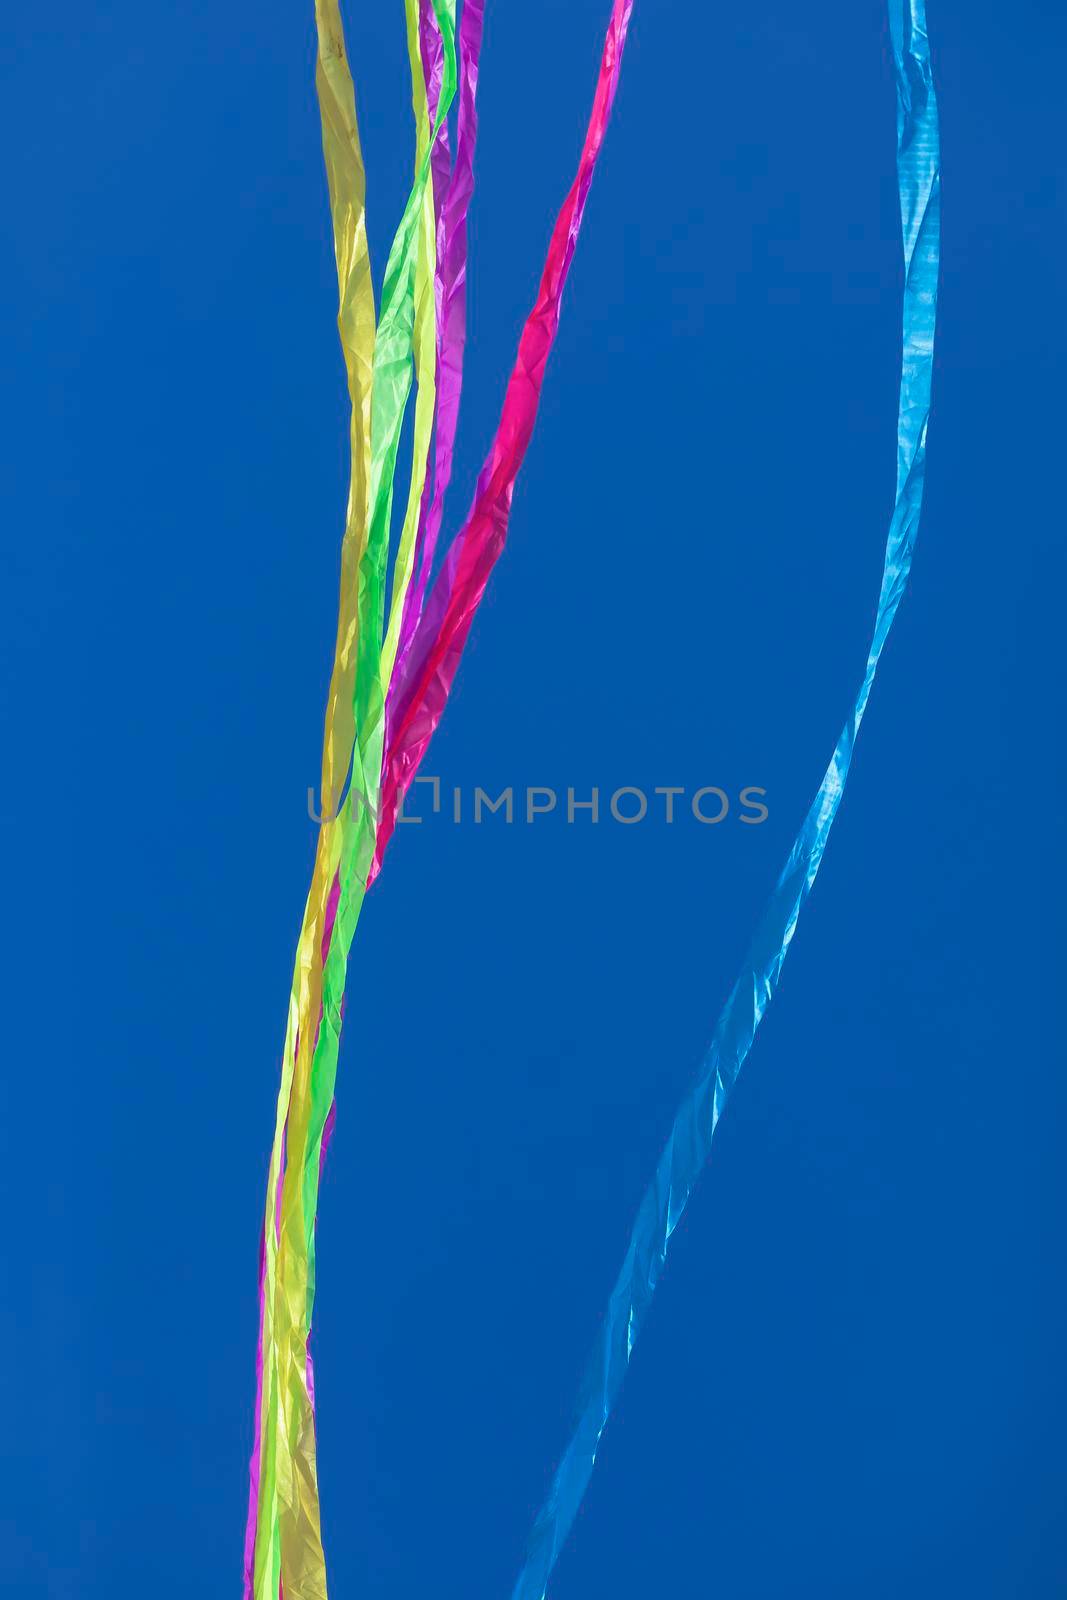 Colored ribbons and lines, floating on a plain background. by alvarobueno